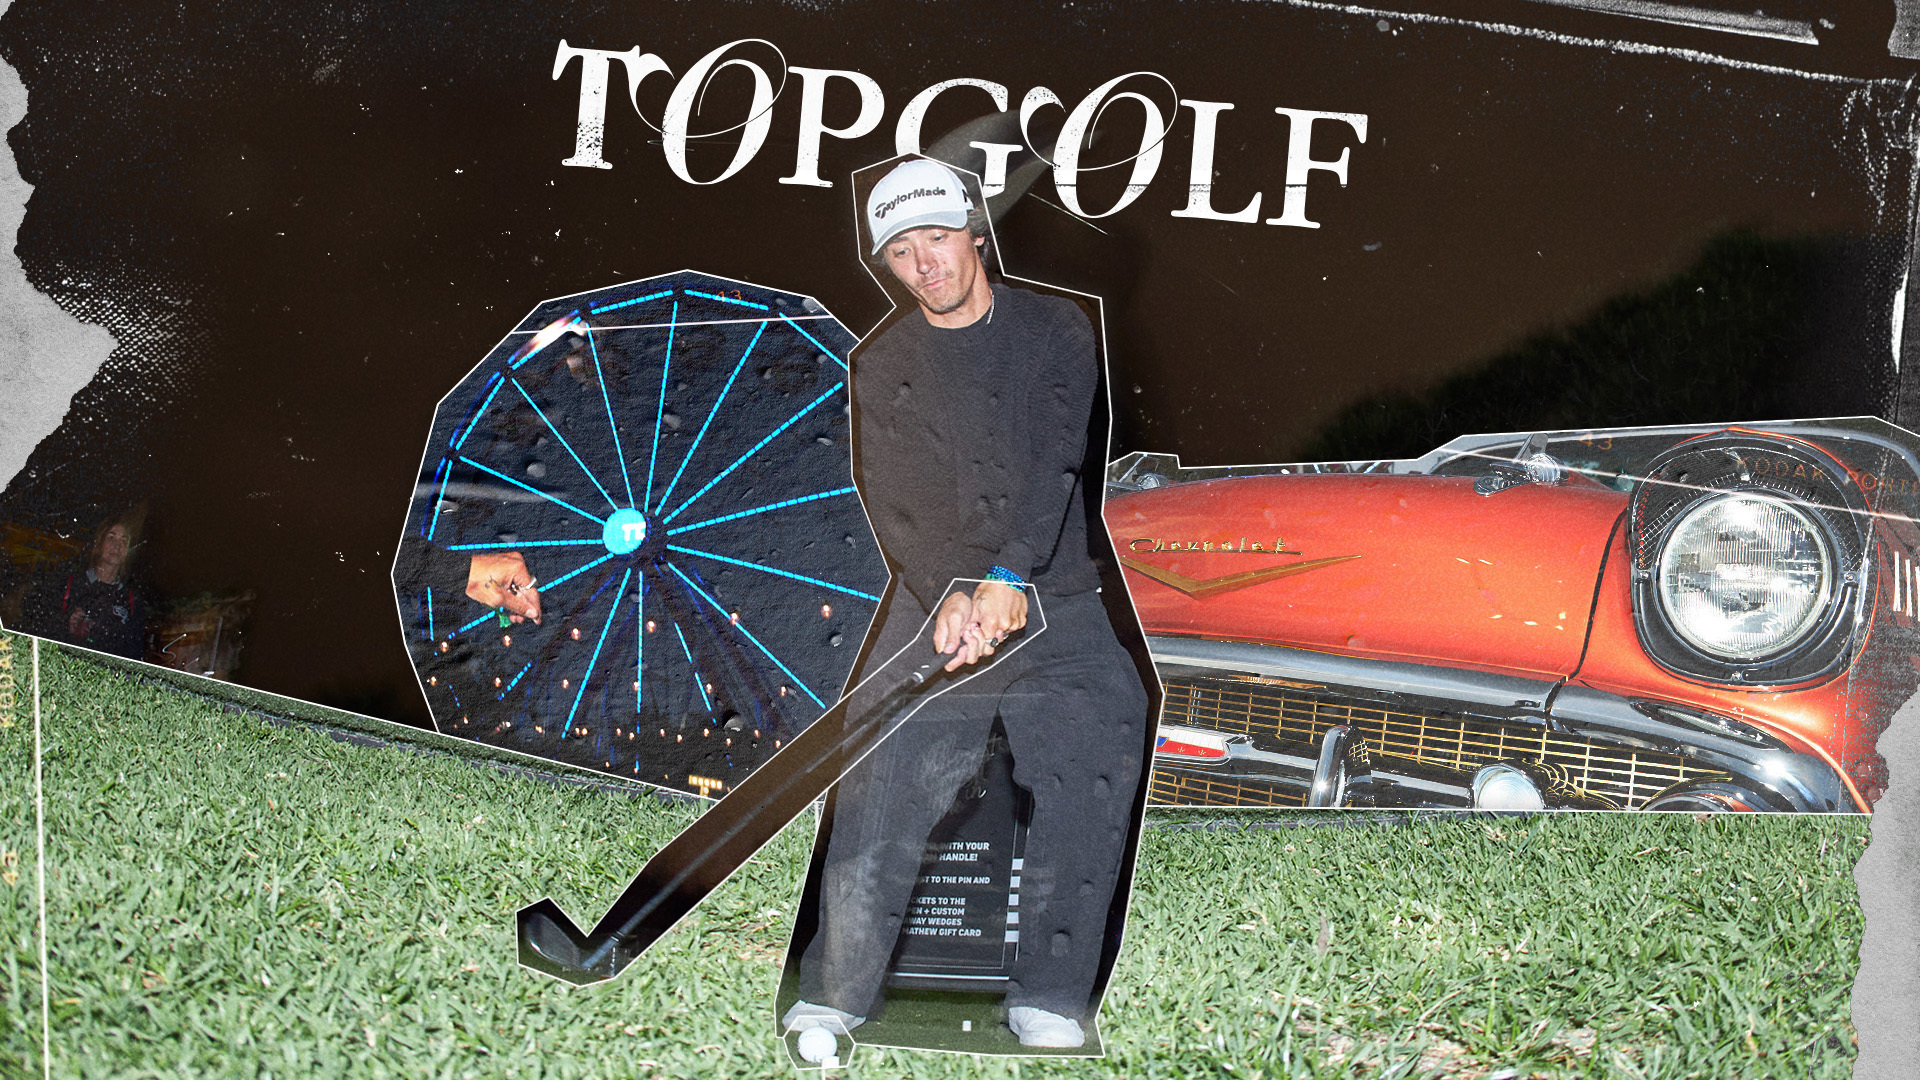 How Topgolf Is Helping to Modernize the Game of Golf With Technology